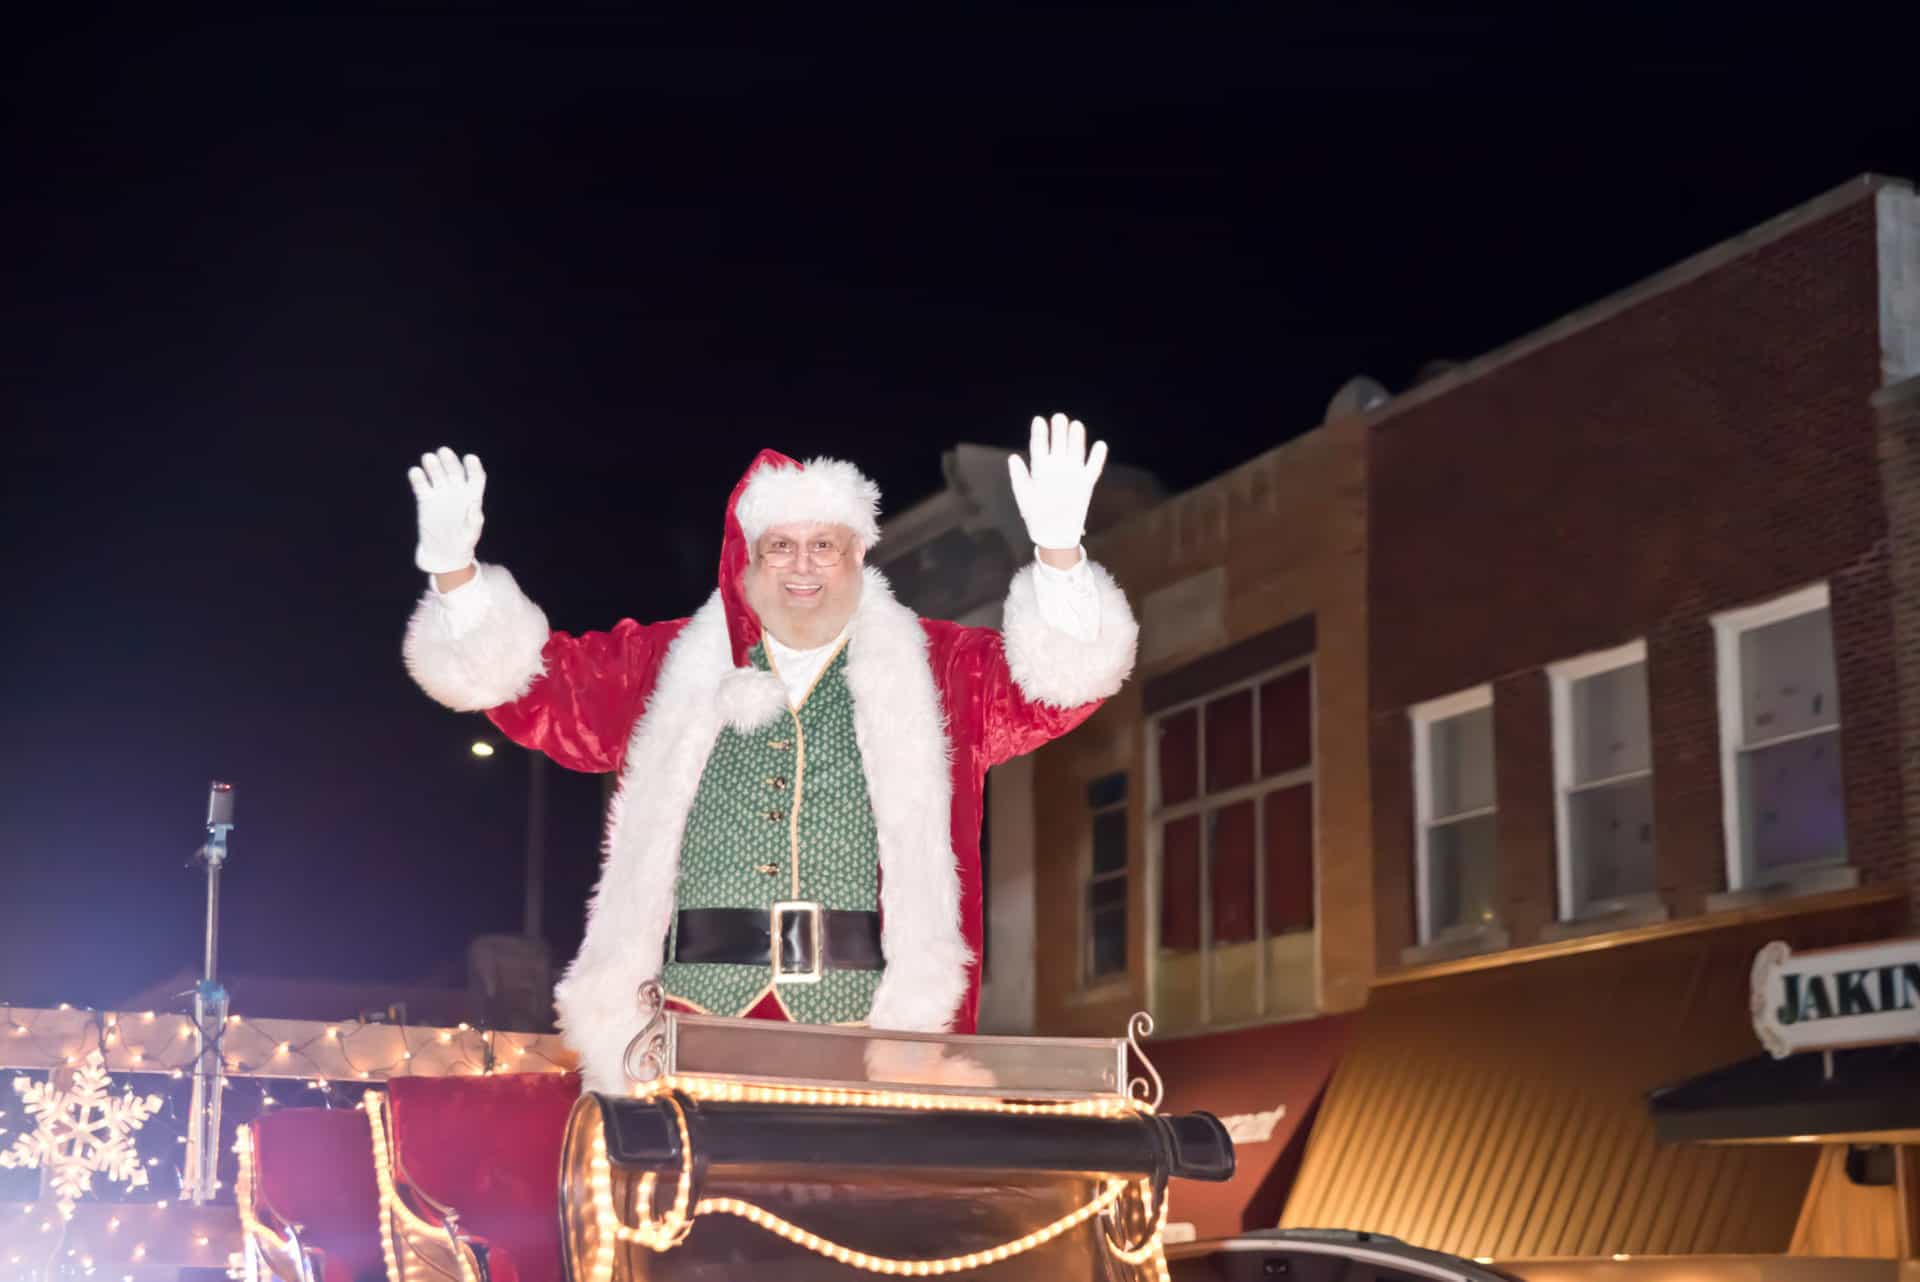 Person dressed as Santa Claus waving from parade float.